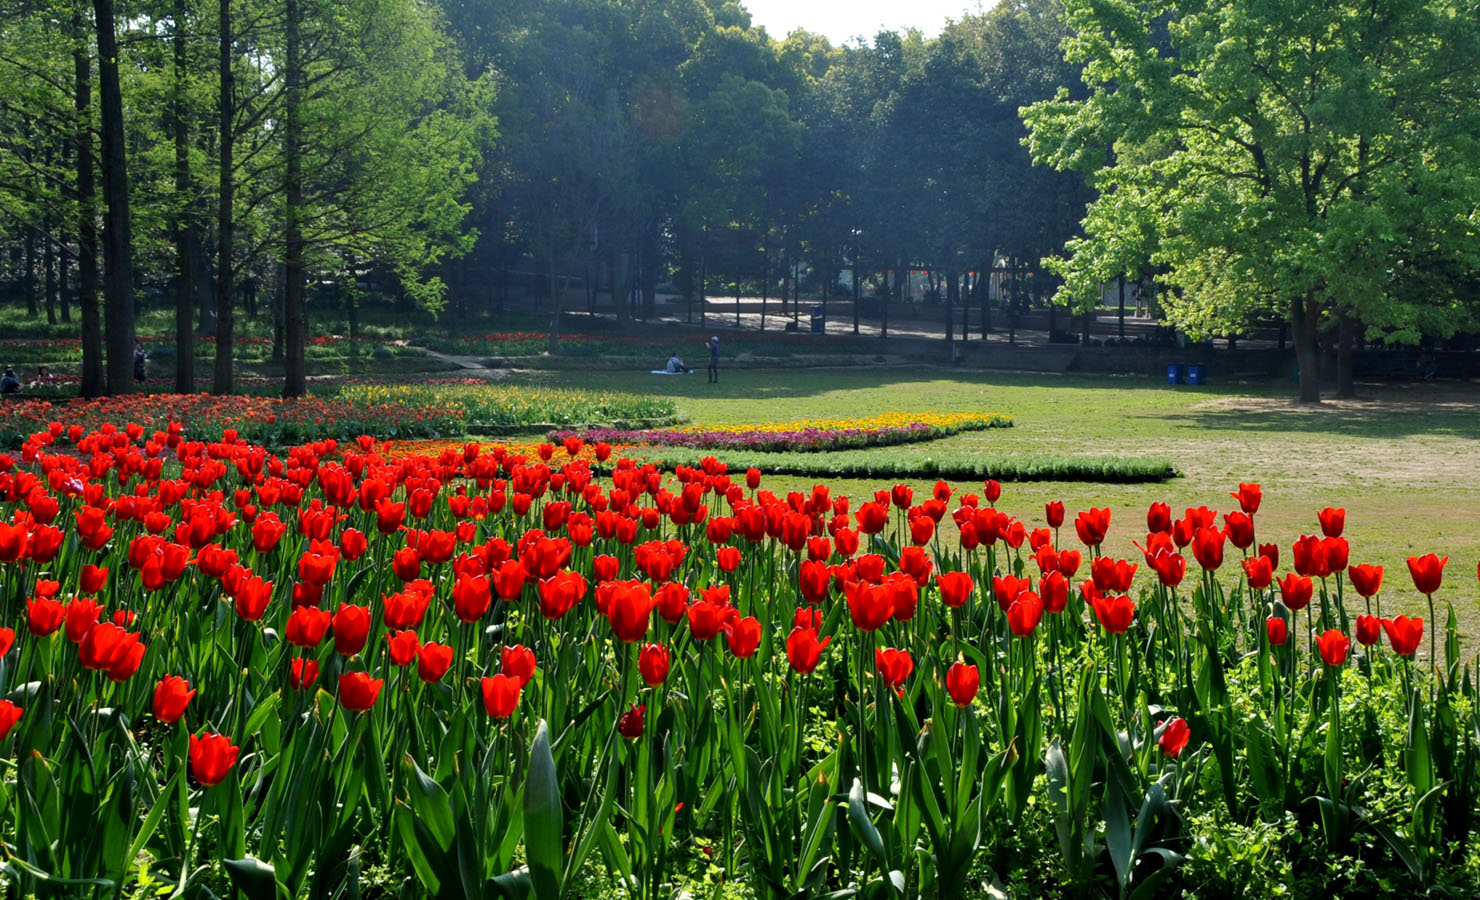 The photo taken on April 10 in Wuhan, Hubei Province shows a garden flames with red tulips. [Xiaoyong/China.org.cn]